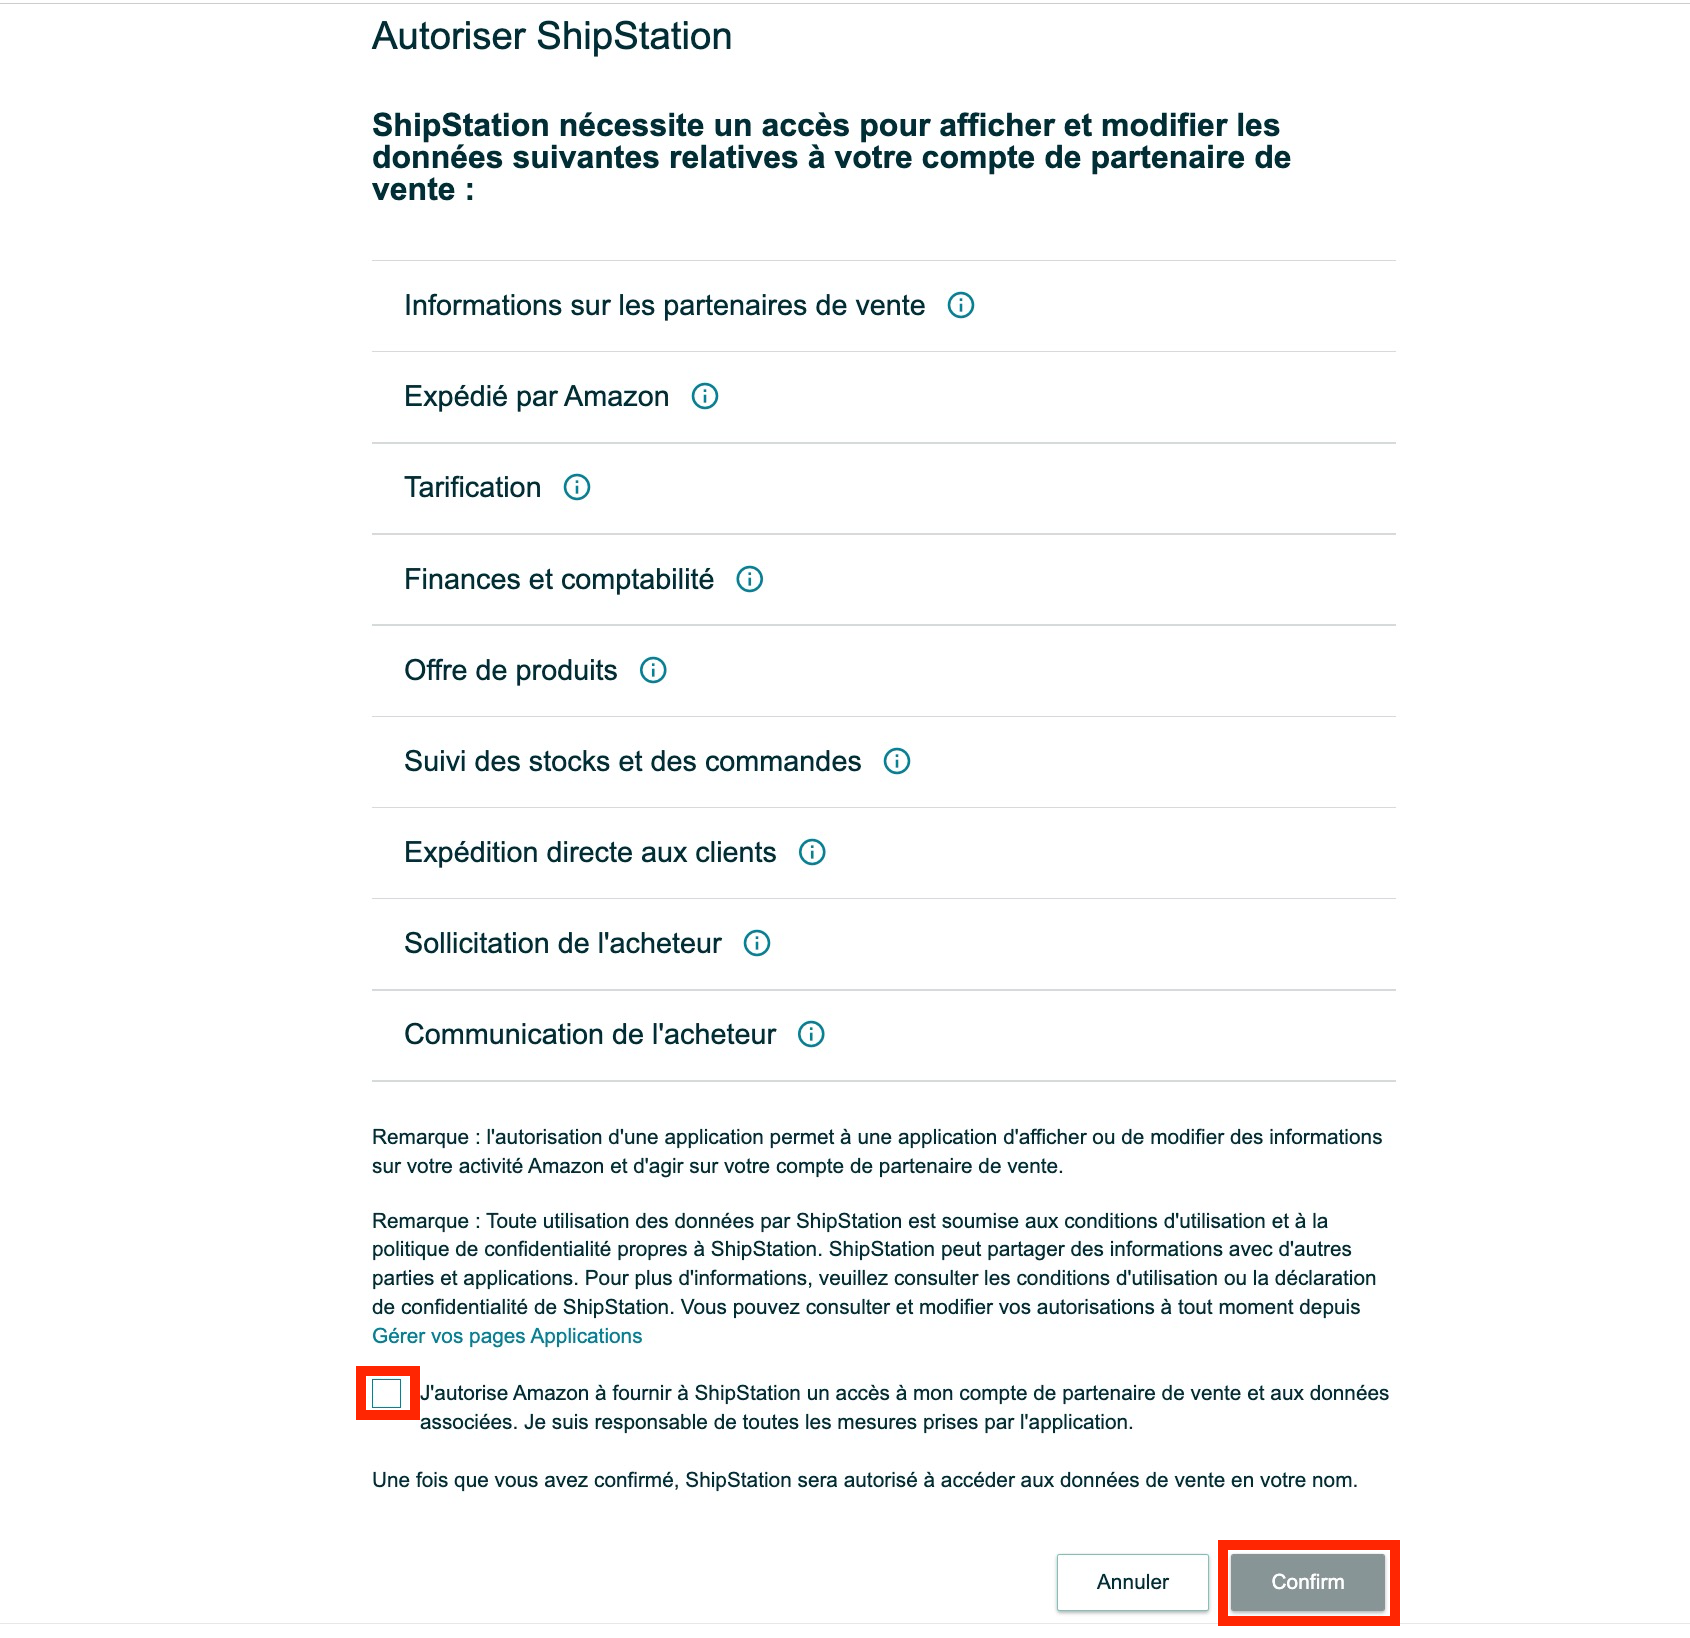 Amazon Authorization screen with the authorization checkbox highlighted.